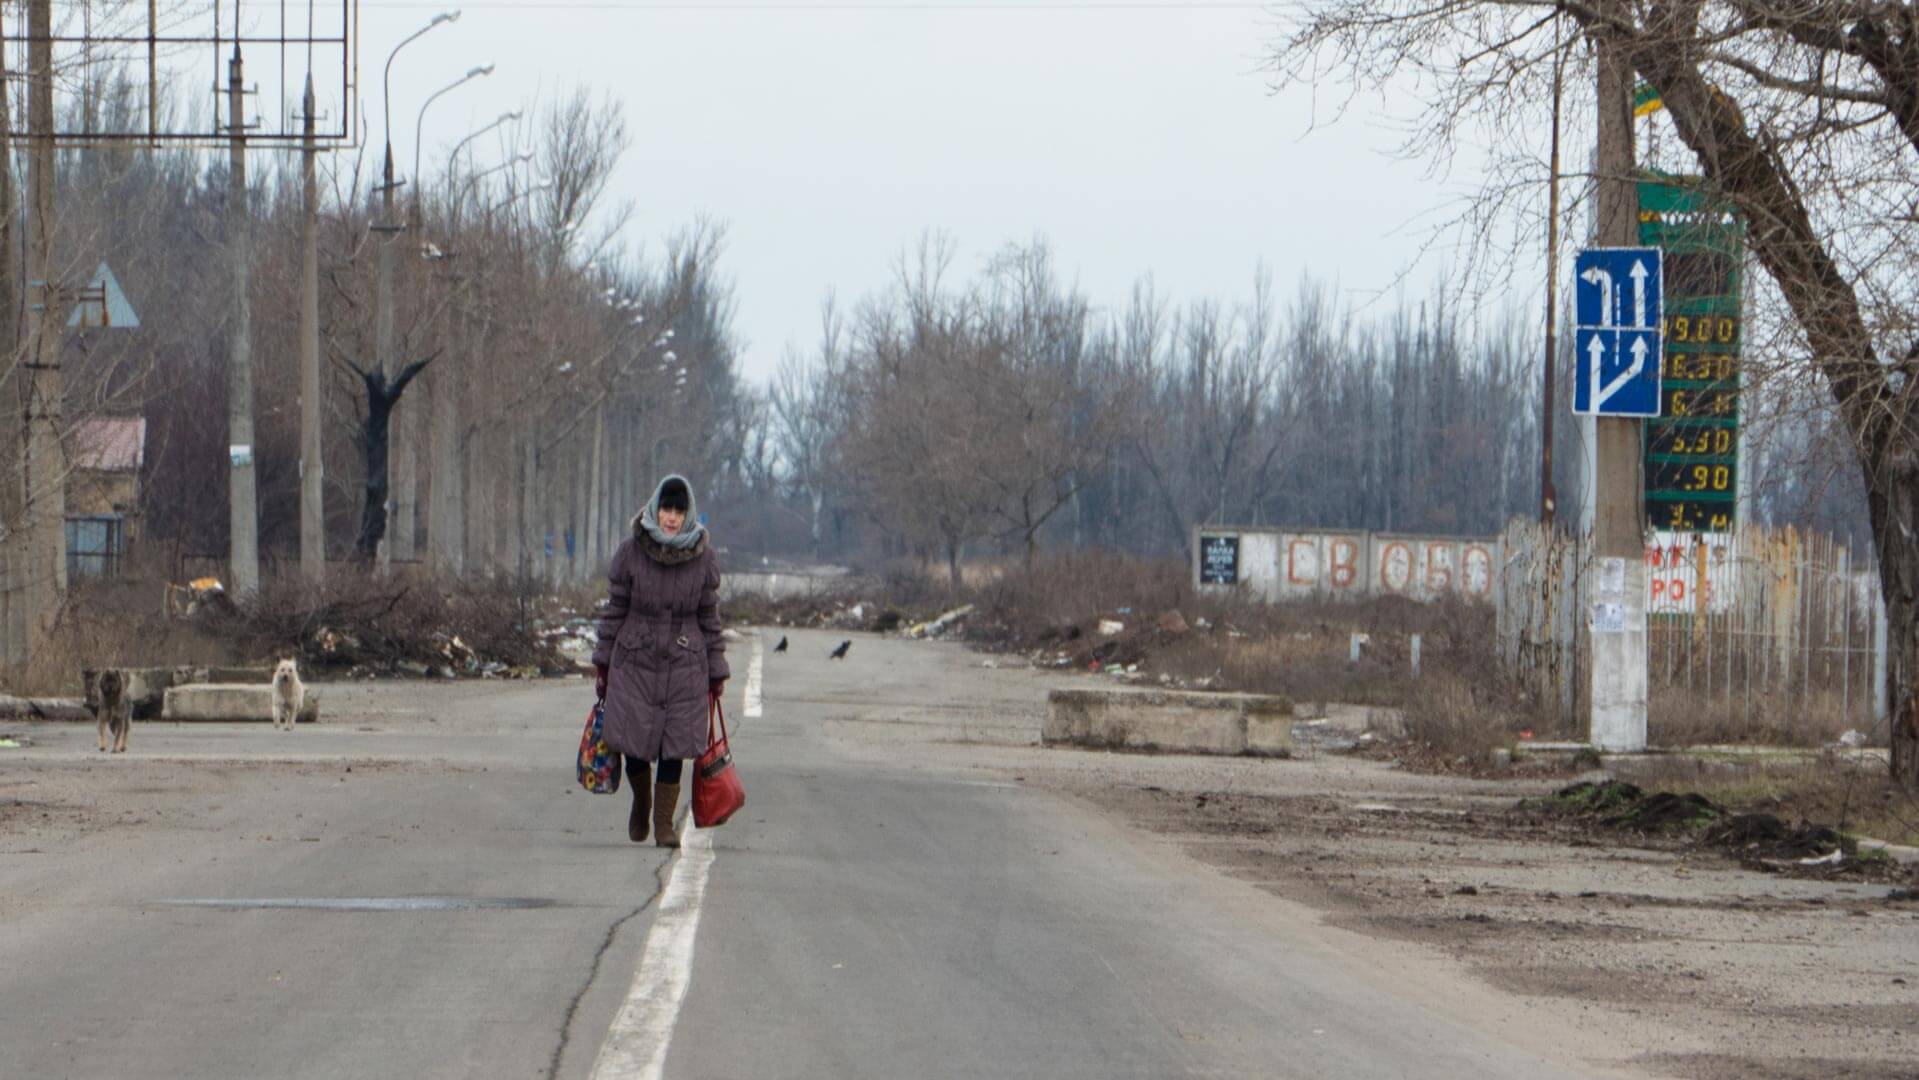 A woman walks through a bombed-out street in Ukraine